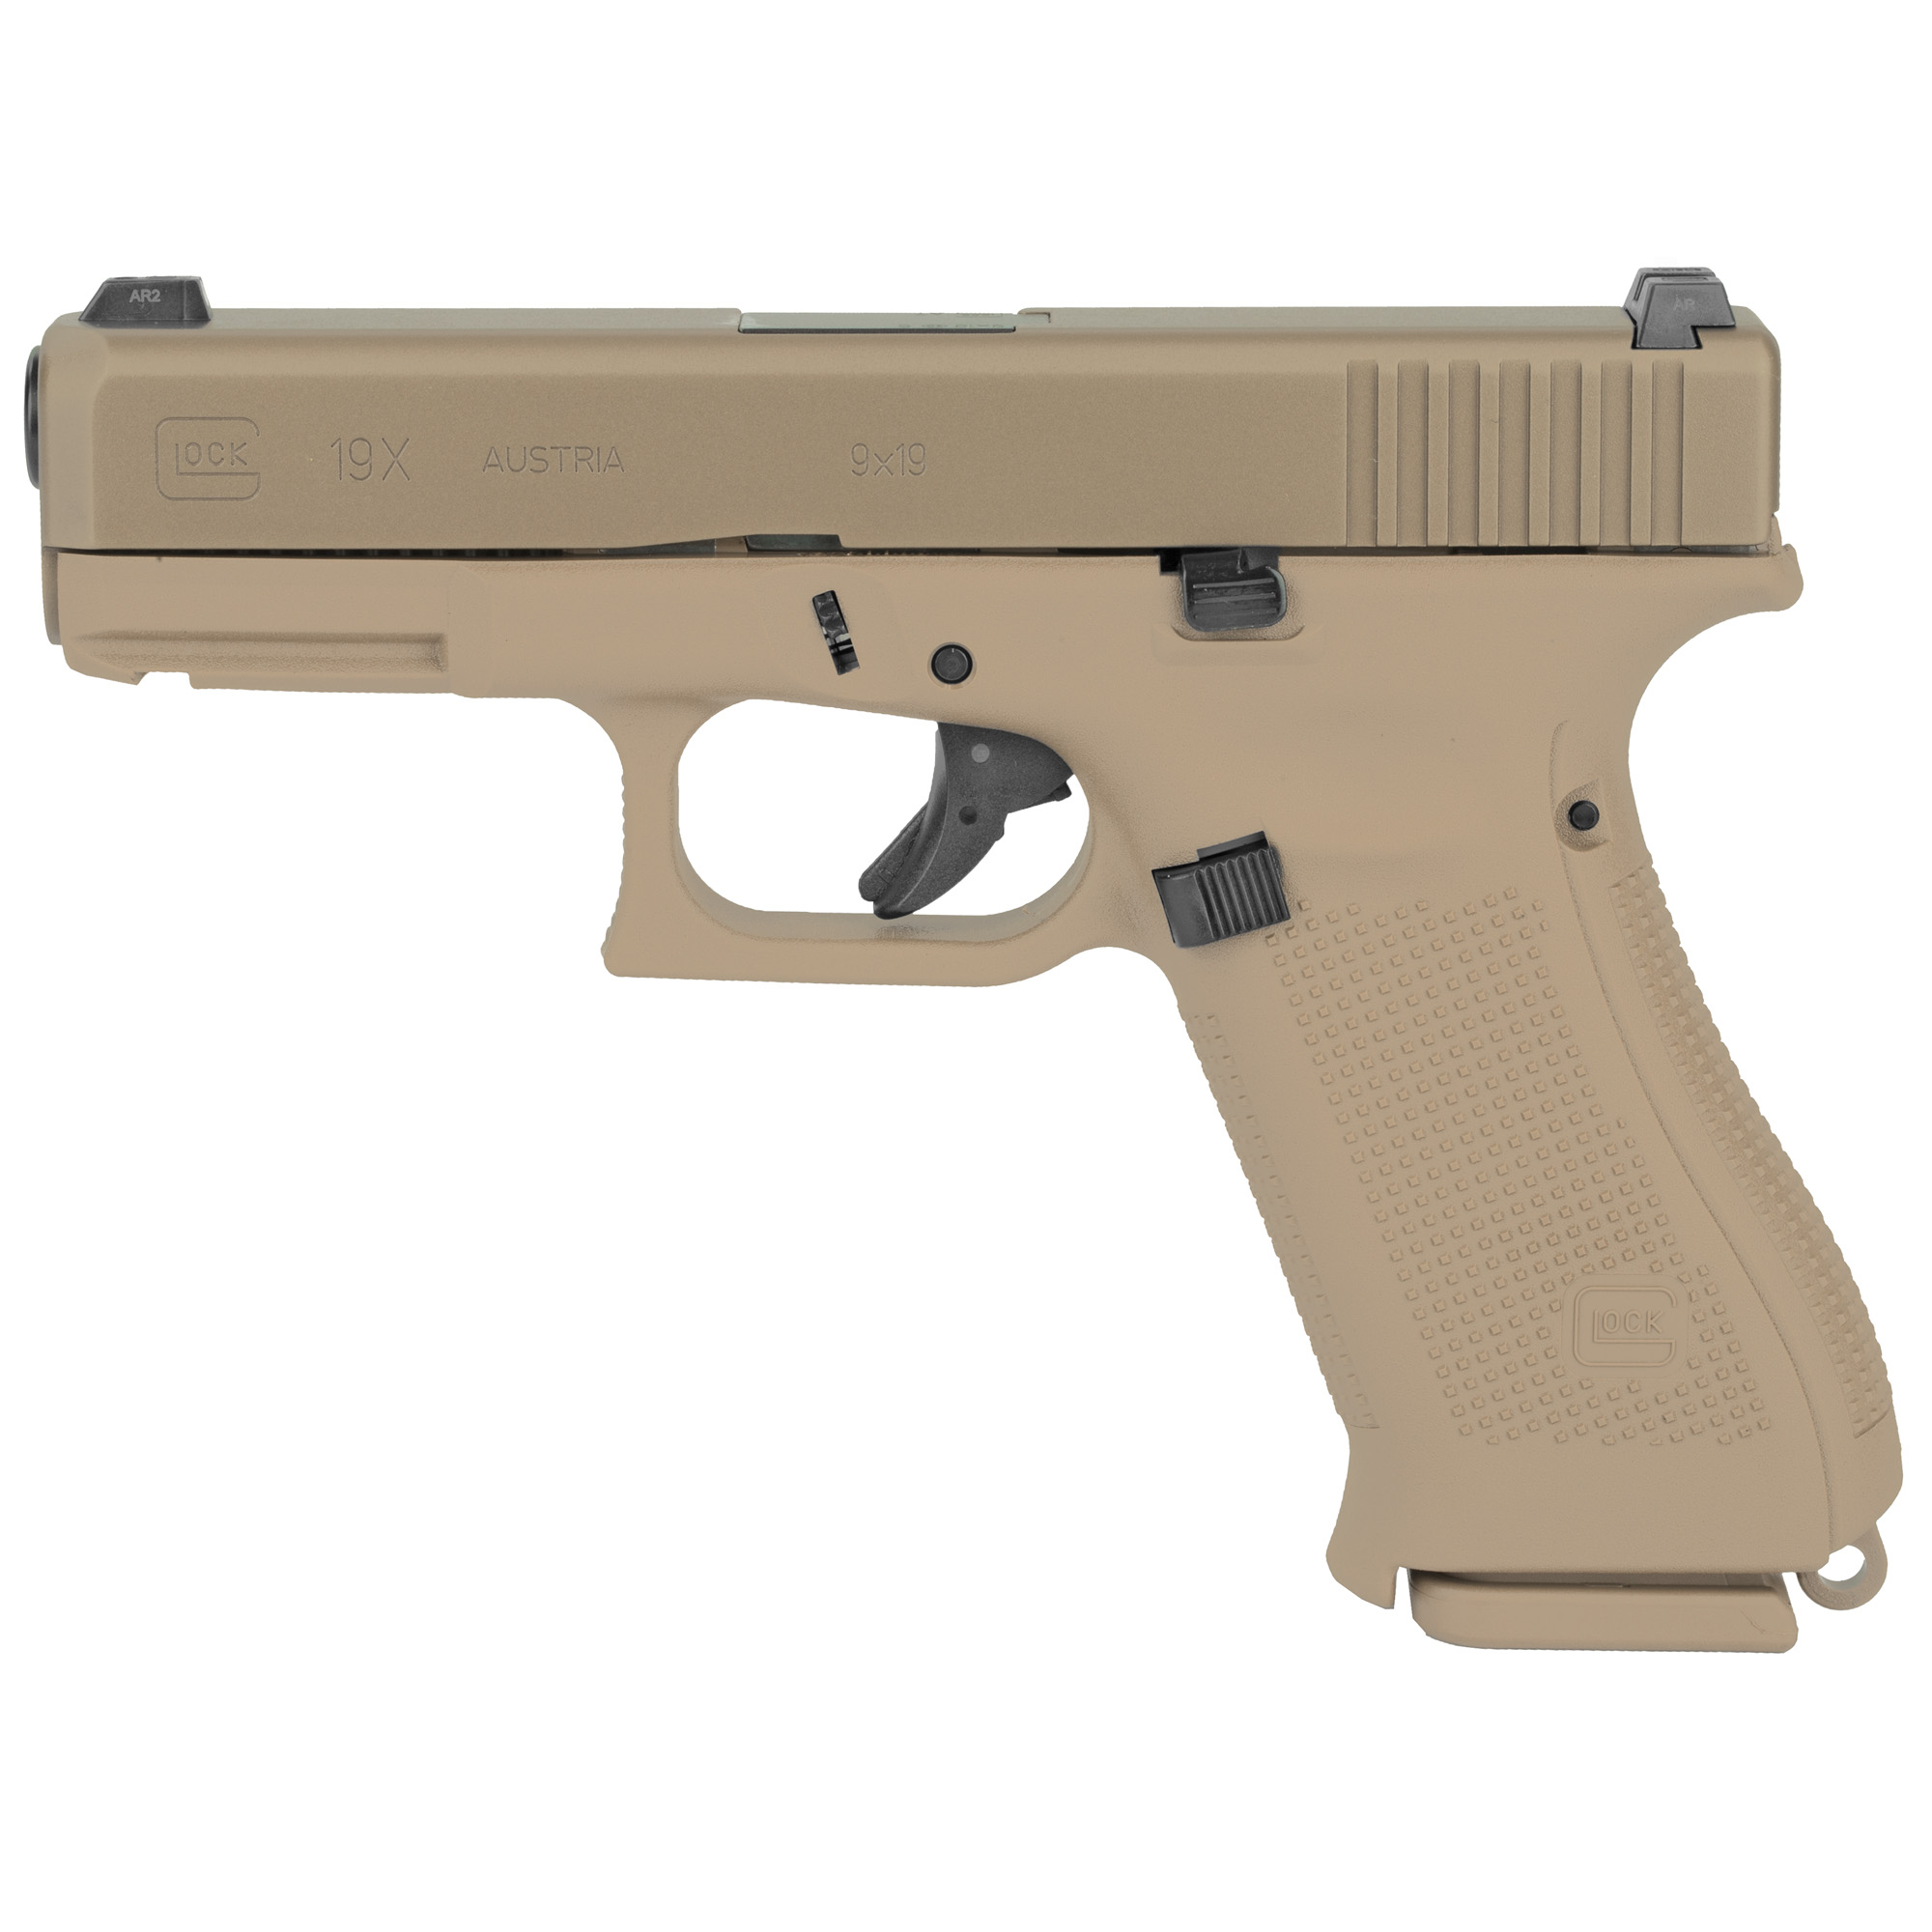 Glock, 19X, Striker Fired, Semi-automatic, Polymer Frame Pistol, Compact, 9MM, 4.02" Barrel, Glock Marksman Barrel, nPVD Finish, Coyote, No Finger Grooves, Glock Night Sights, 19 Rounds, 3 Magazines, (2)-19 Rounds